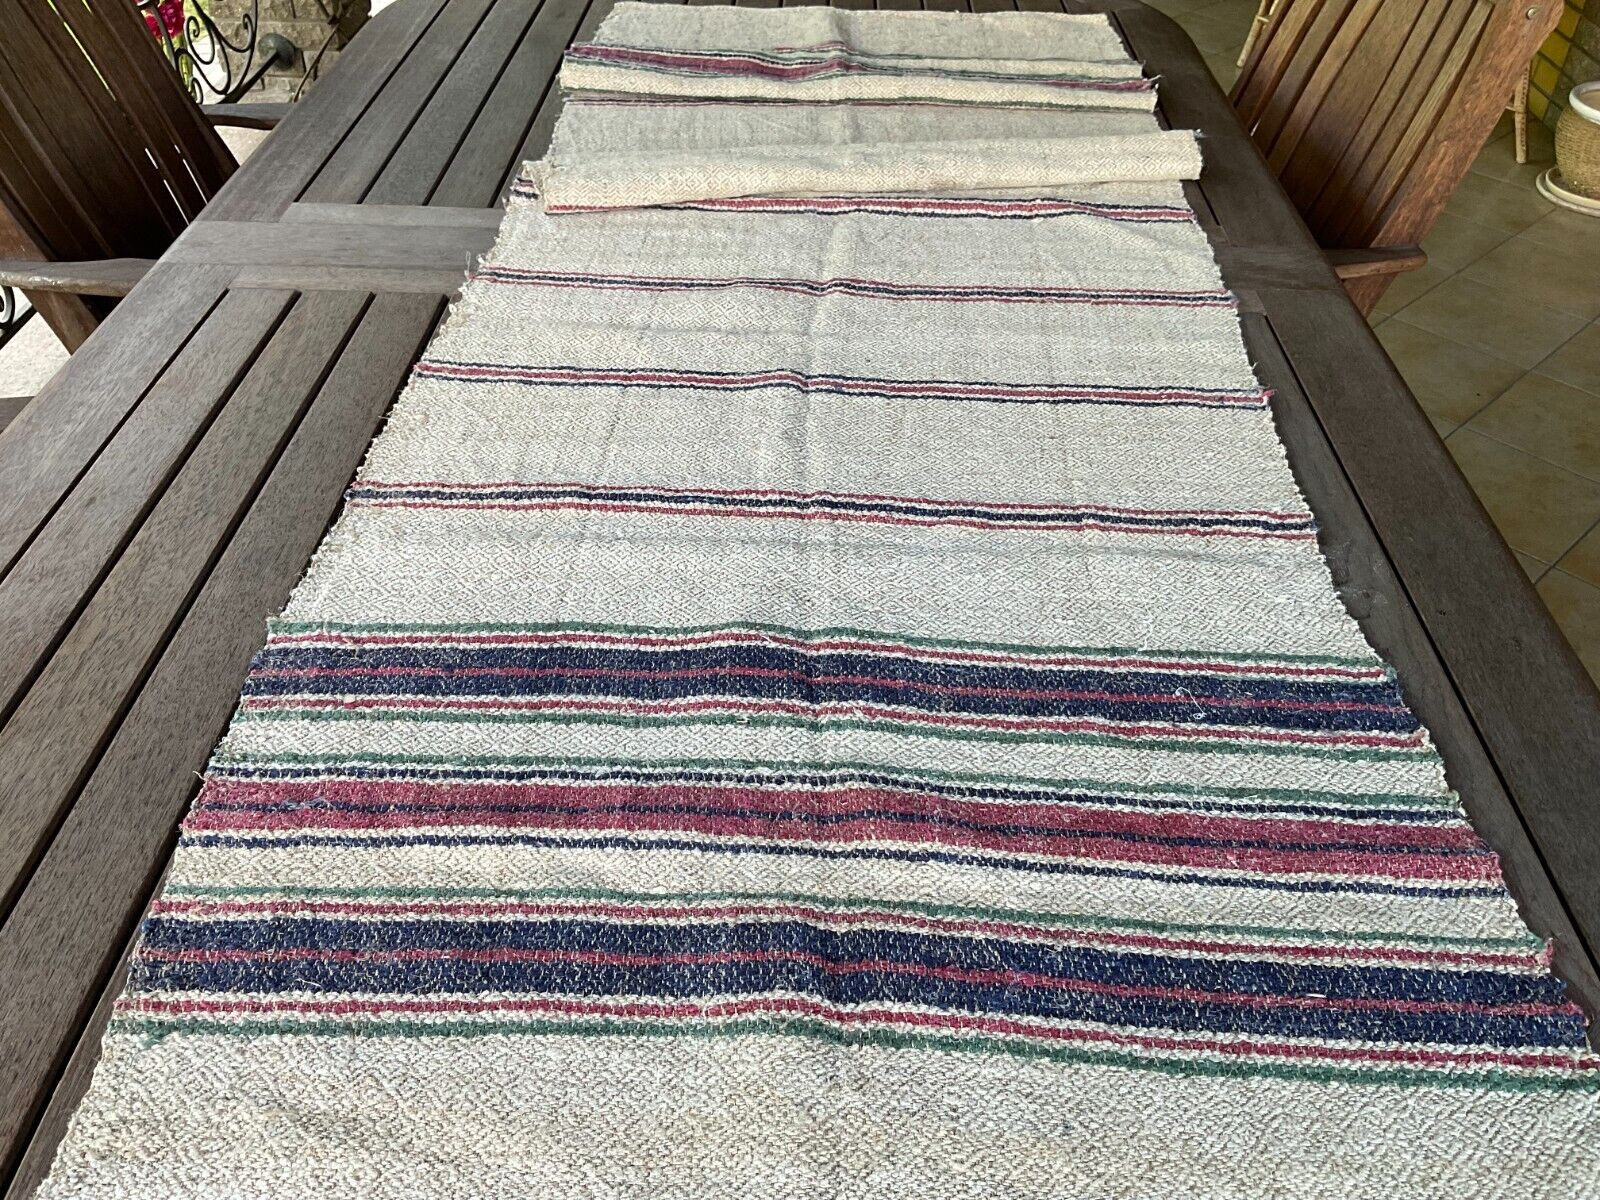 Antique Handwoven Fabric Linen Hemp Textile Striped Rug Upholstery Roll 2.45 yd